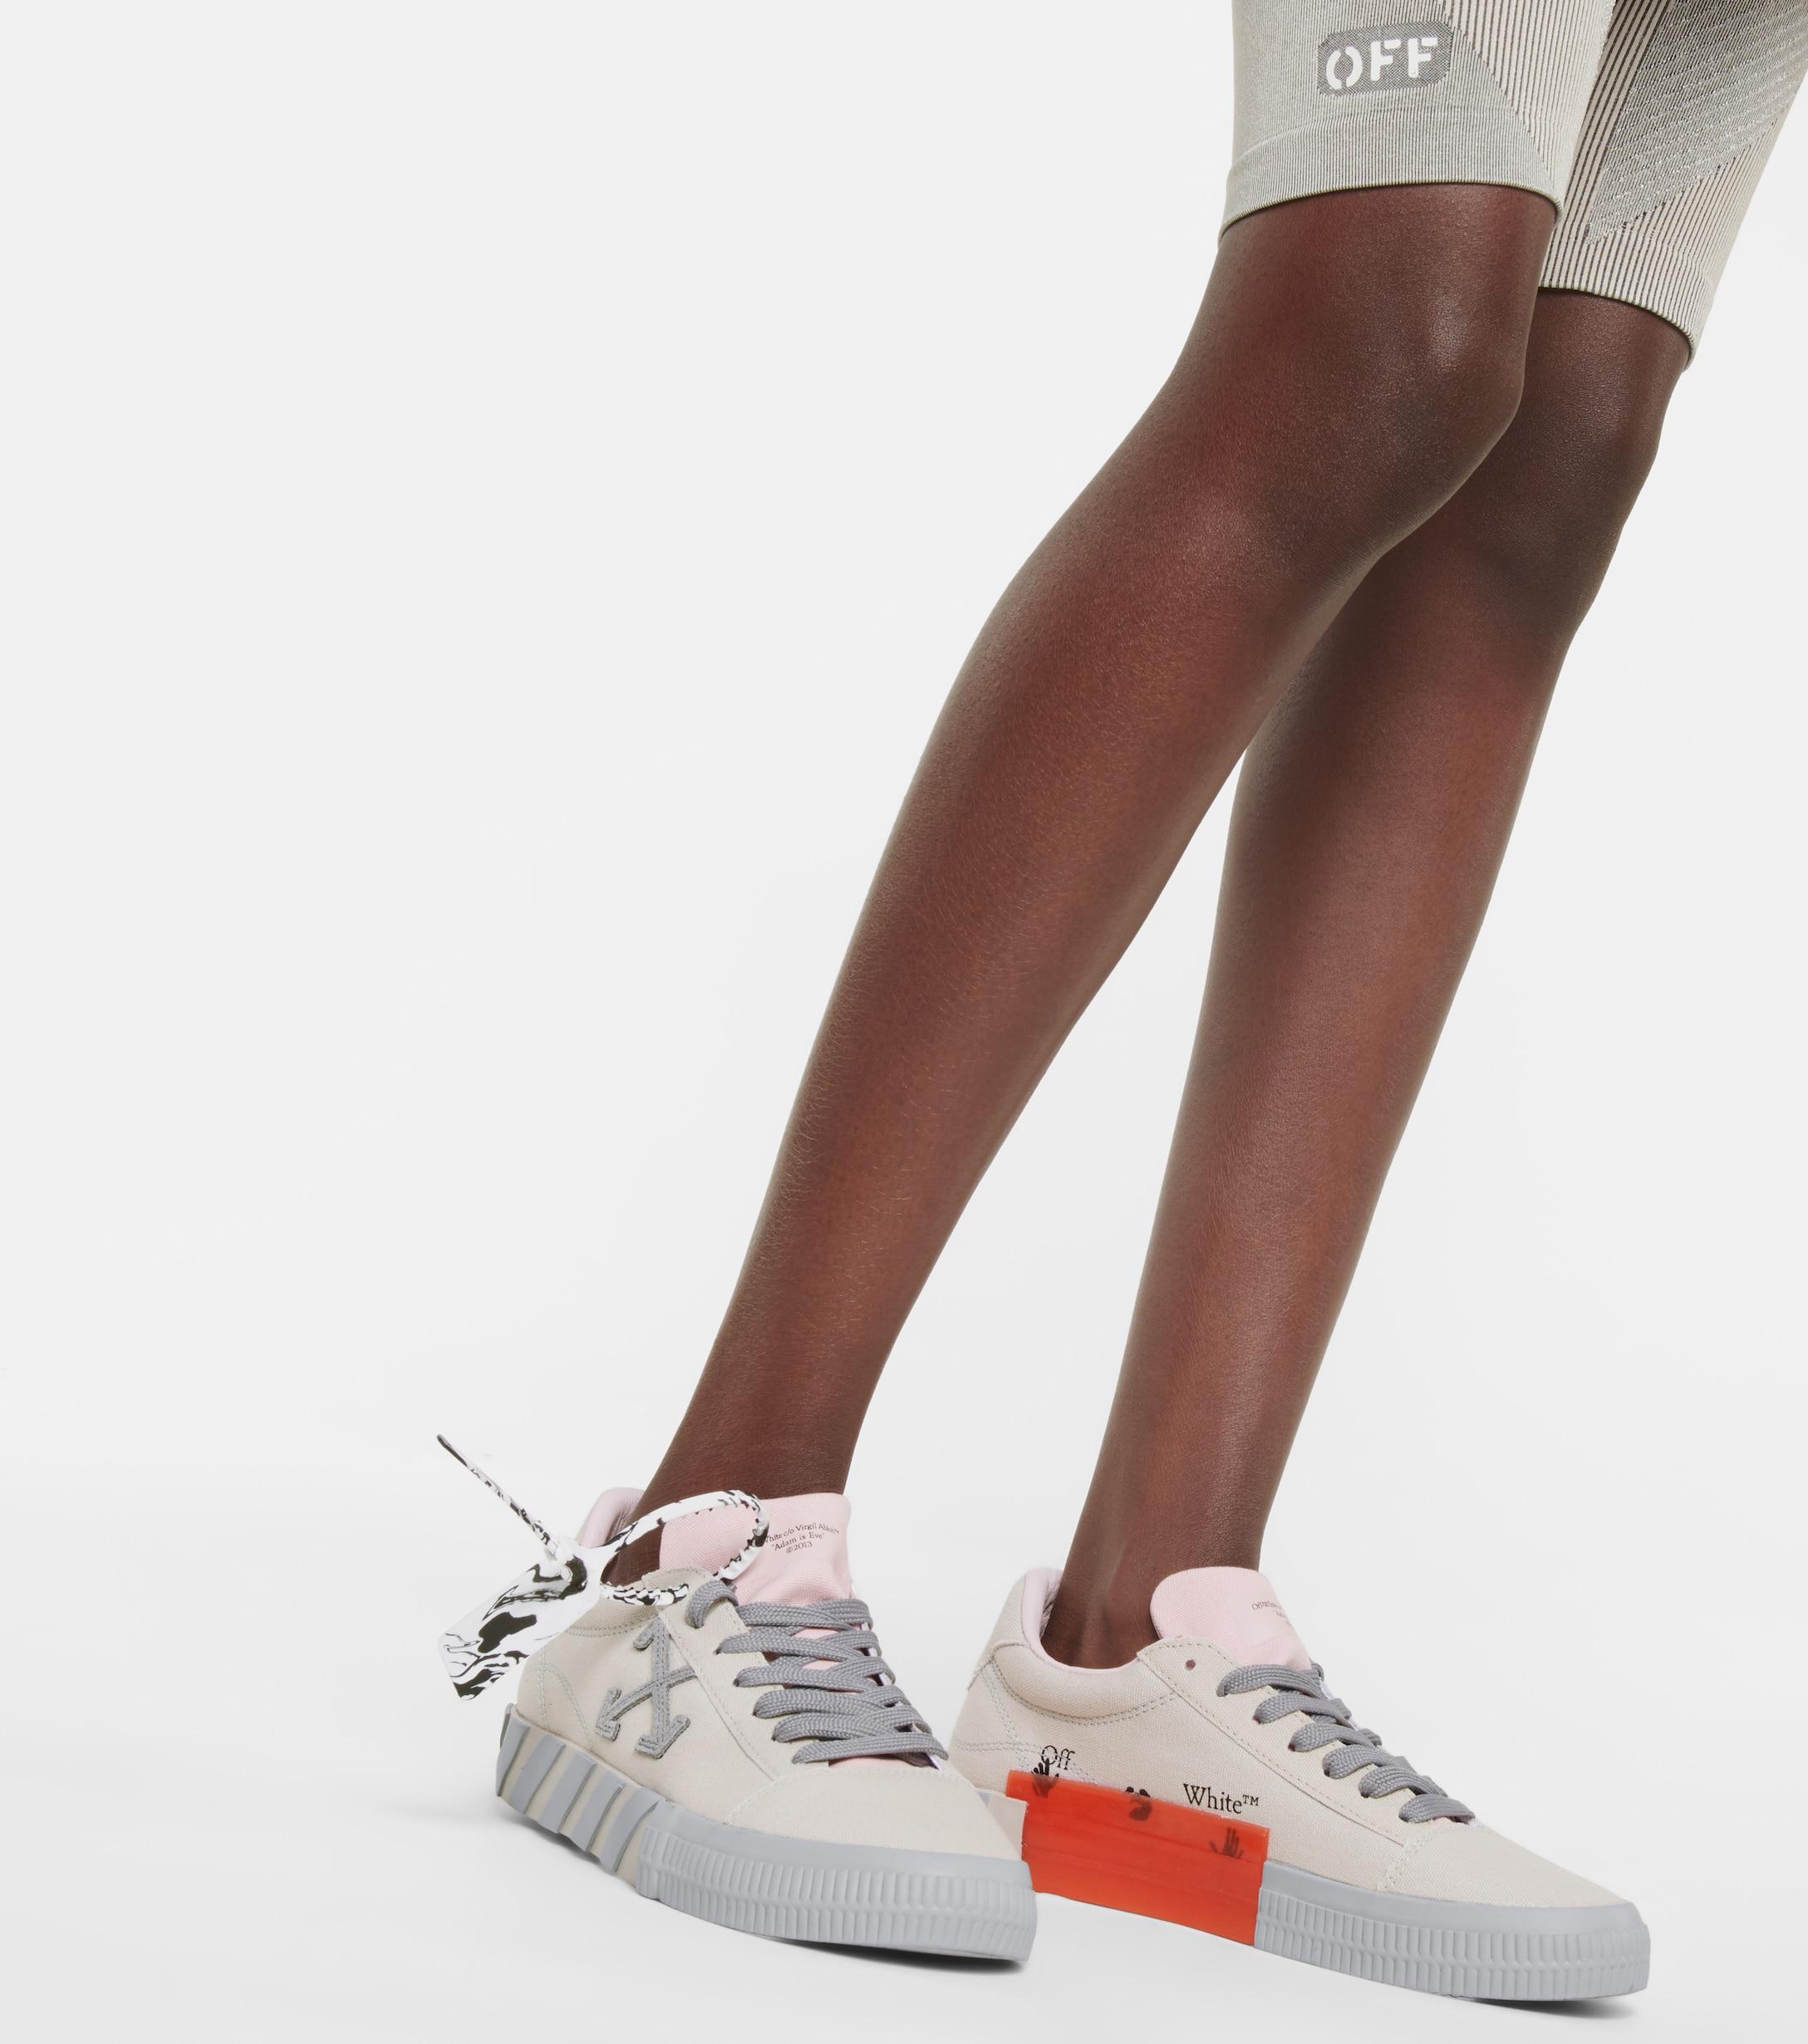 Off-White c/o Virgil Abloh White Pre-owned 4.0 Sneakers